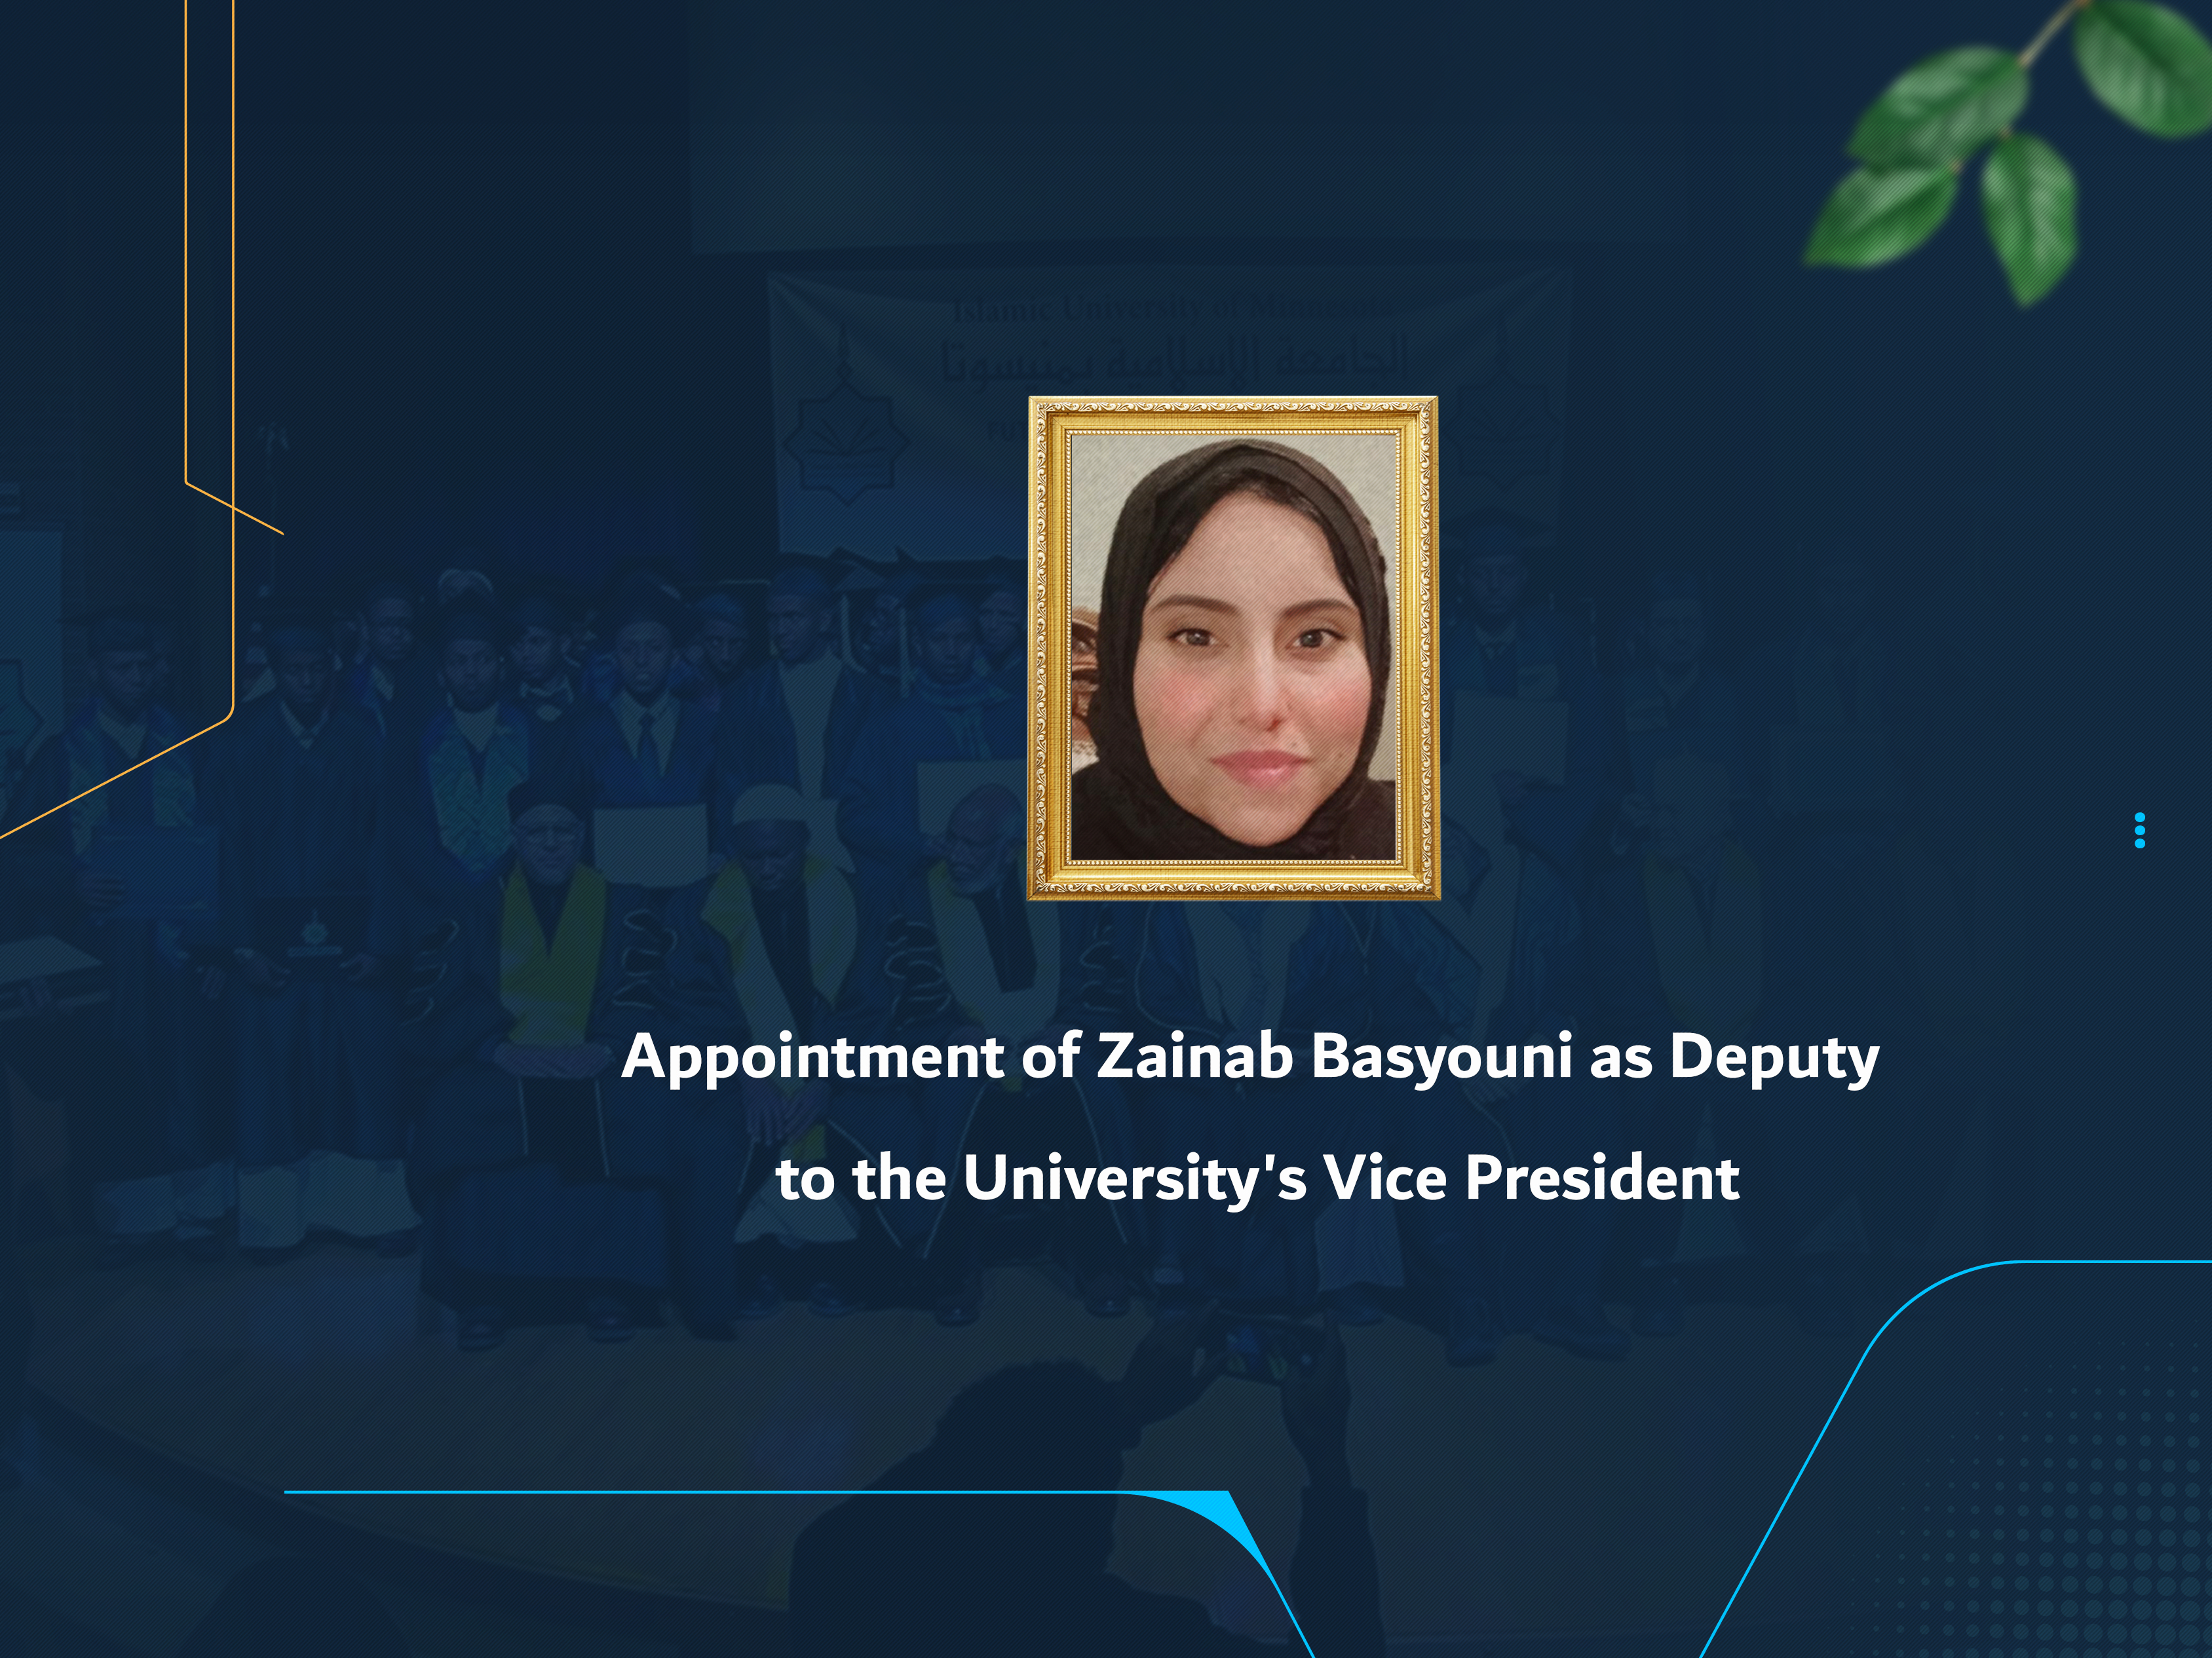 Appointment of Zainab Basyouni as Deputy to the University's Vice President